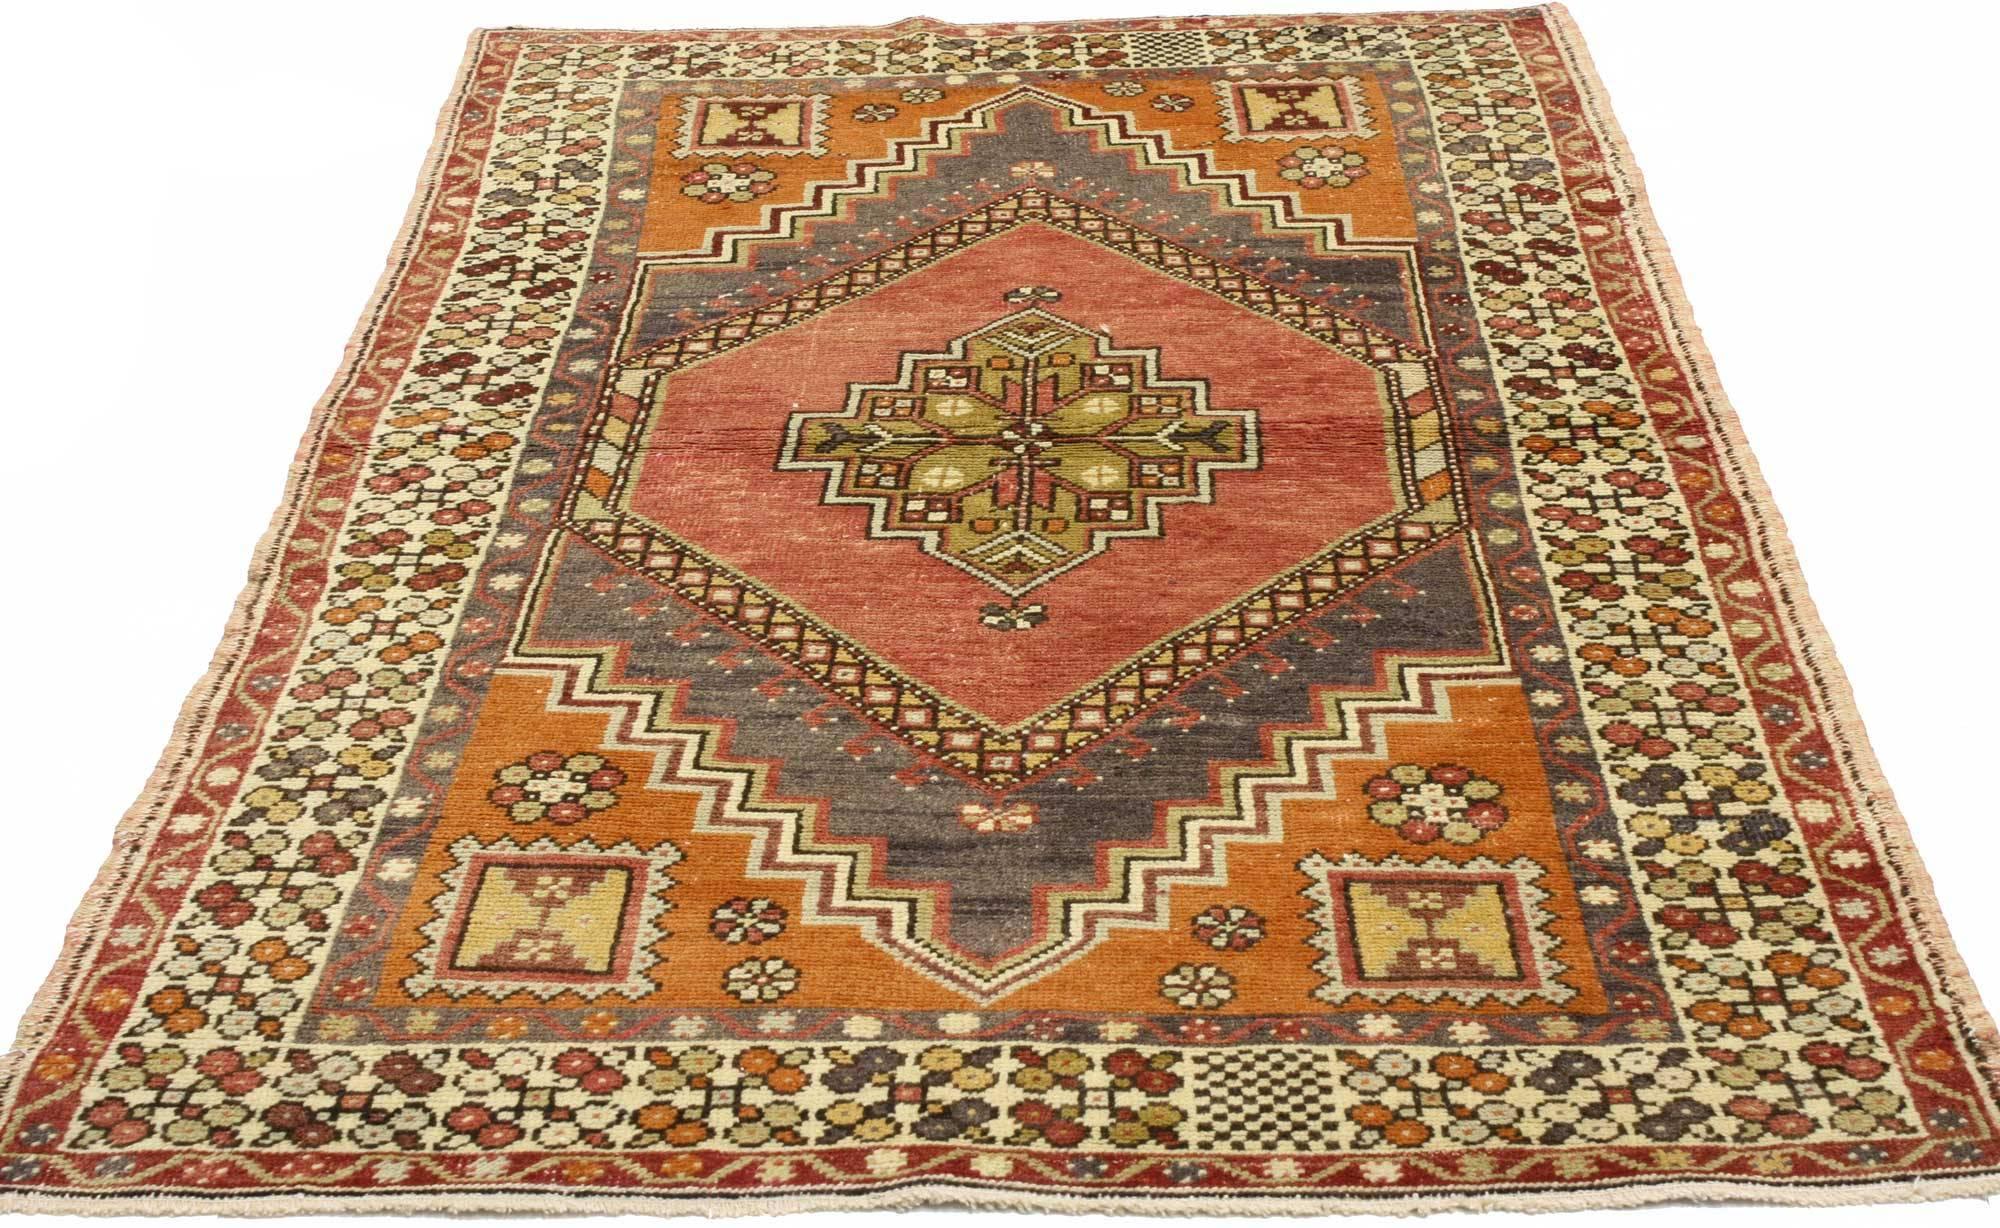 50339, vintage Turkish Oushak accent rug, entry or foyer rug. This hand-knotted wool vintage Turkish Oushak rug features a modern traditional style. Immersed in Anatolian history and refined colors, this vintage Oushak rug combines simplicity with